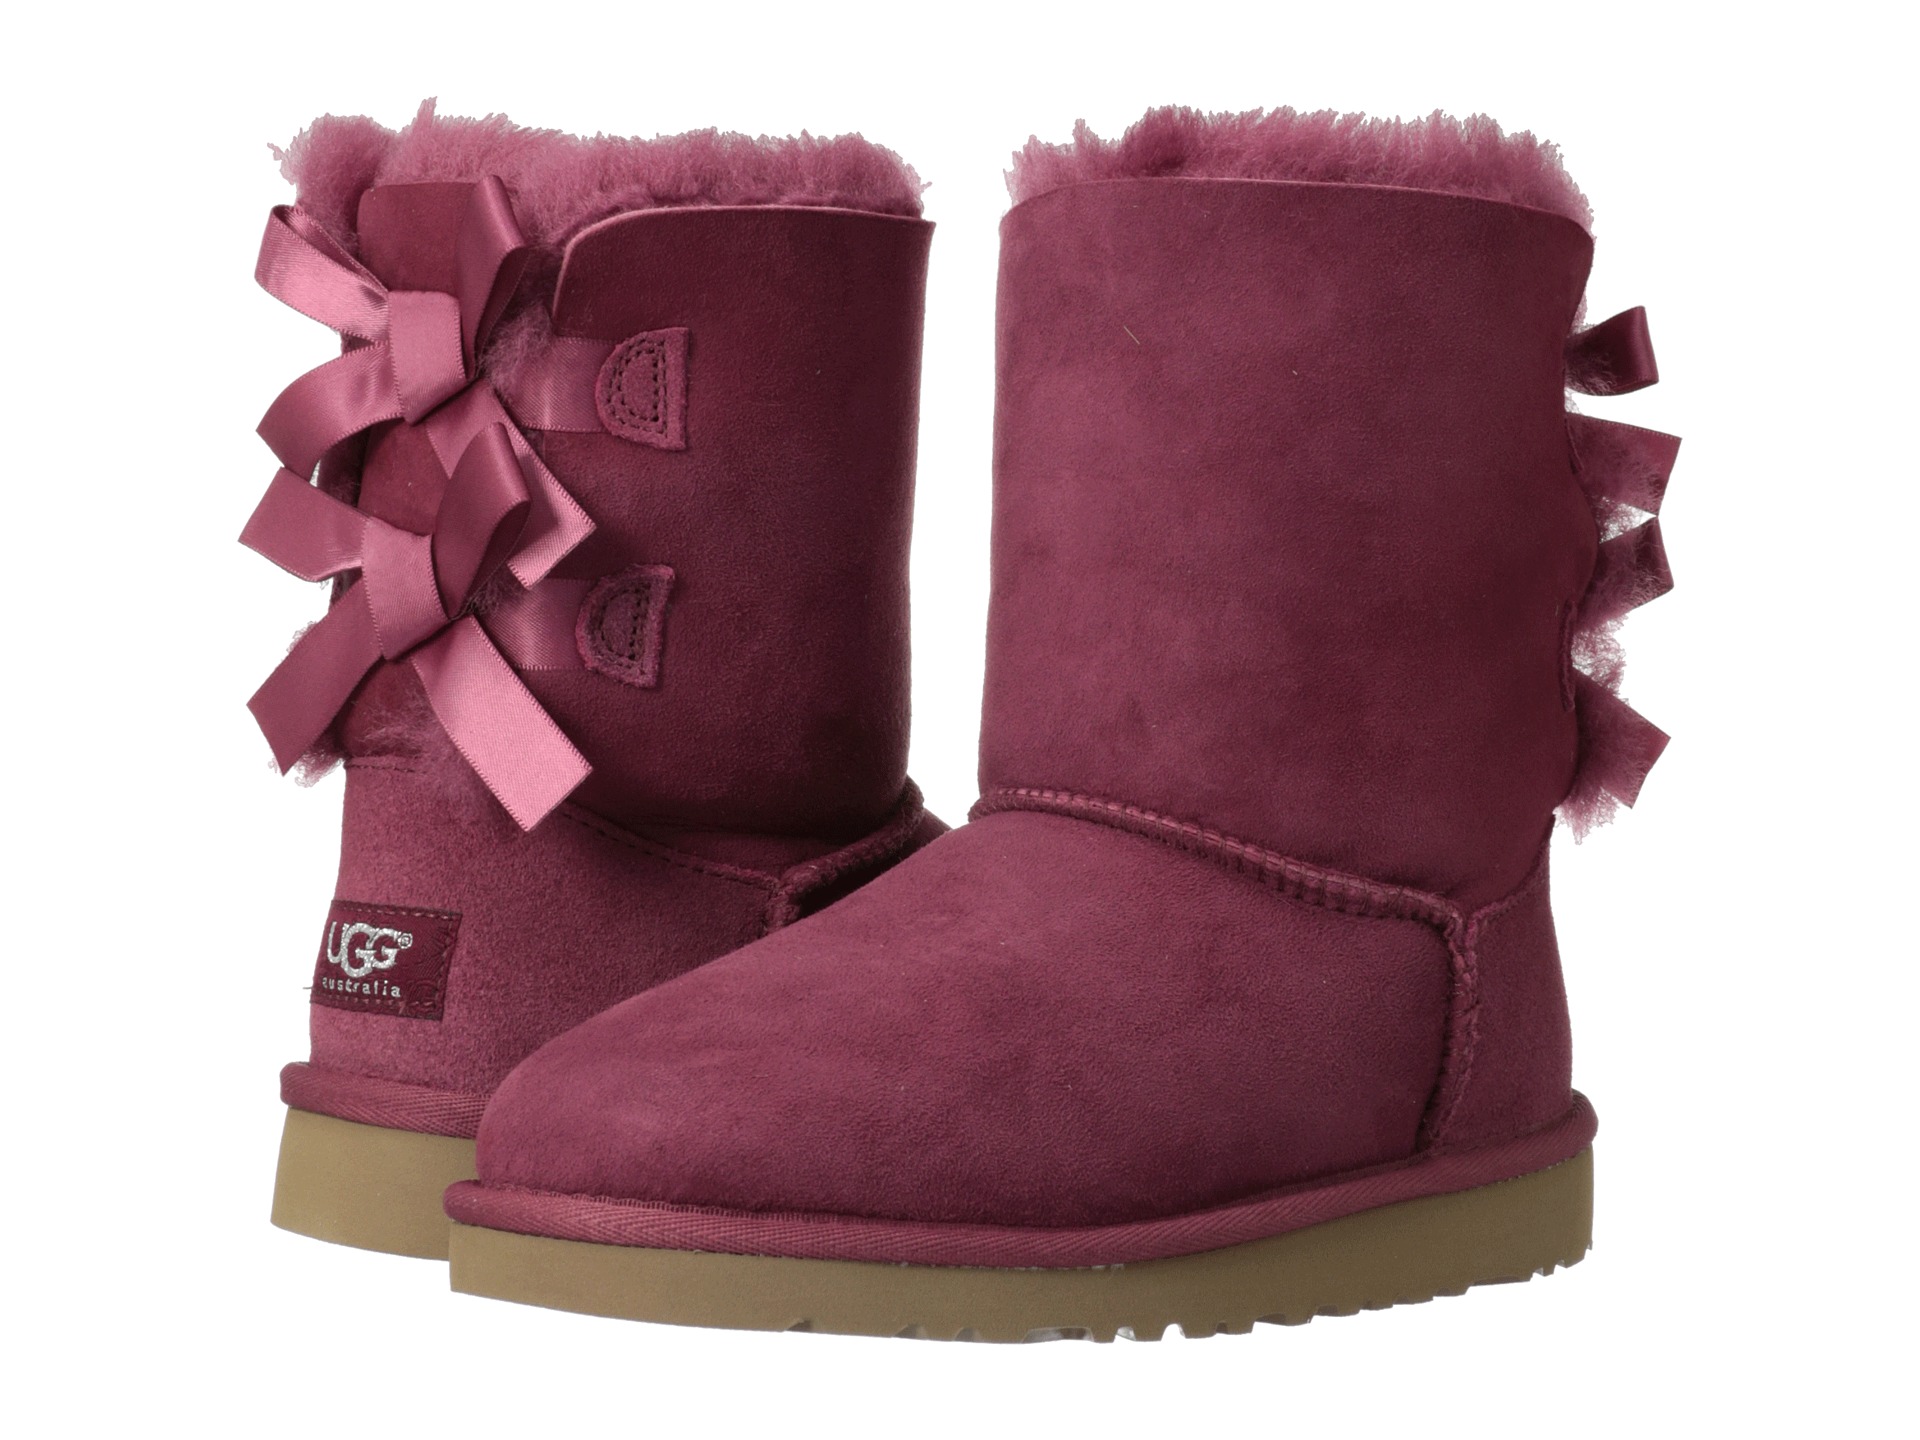 Ugg Kids Bailey Bow Little Kid Big Kid Red Plum | Shipped Free at Zappos